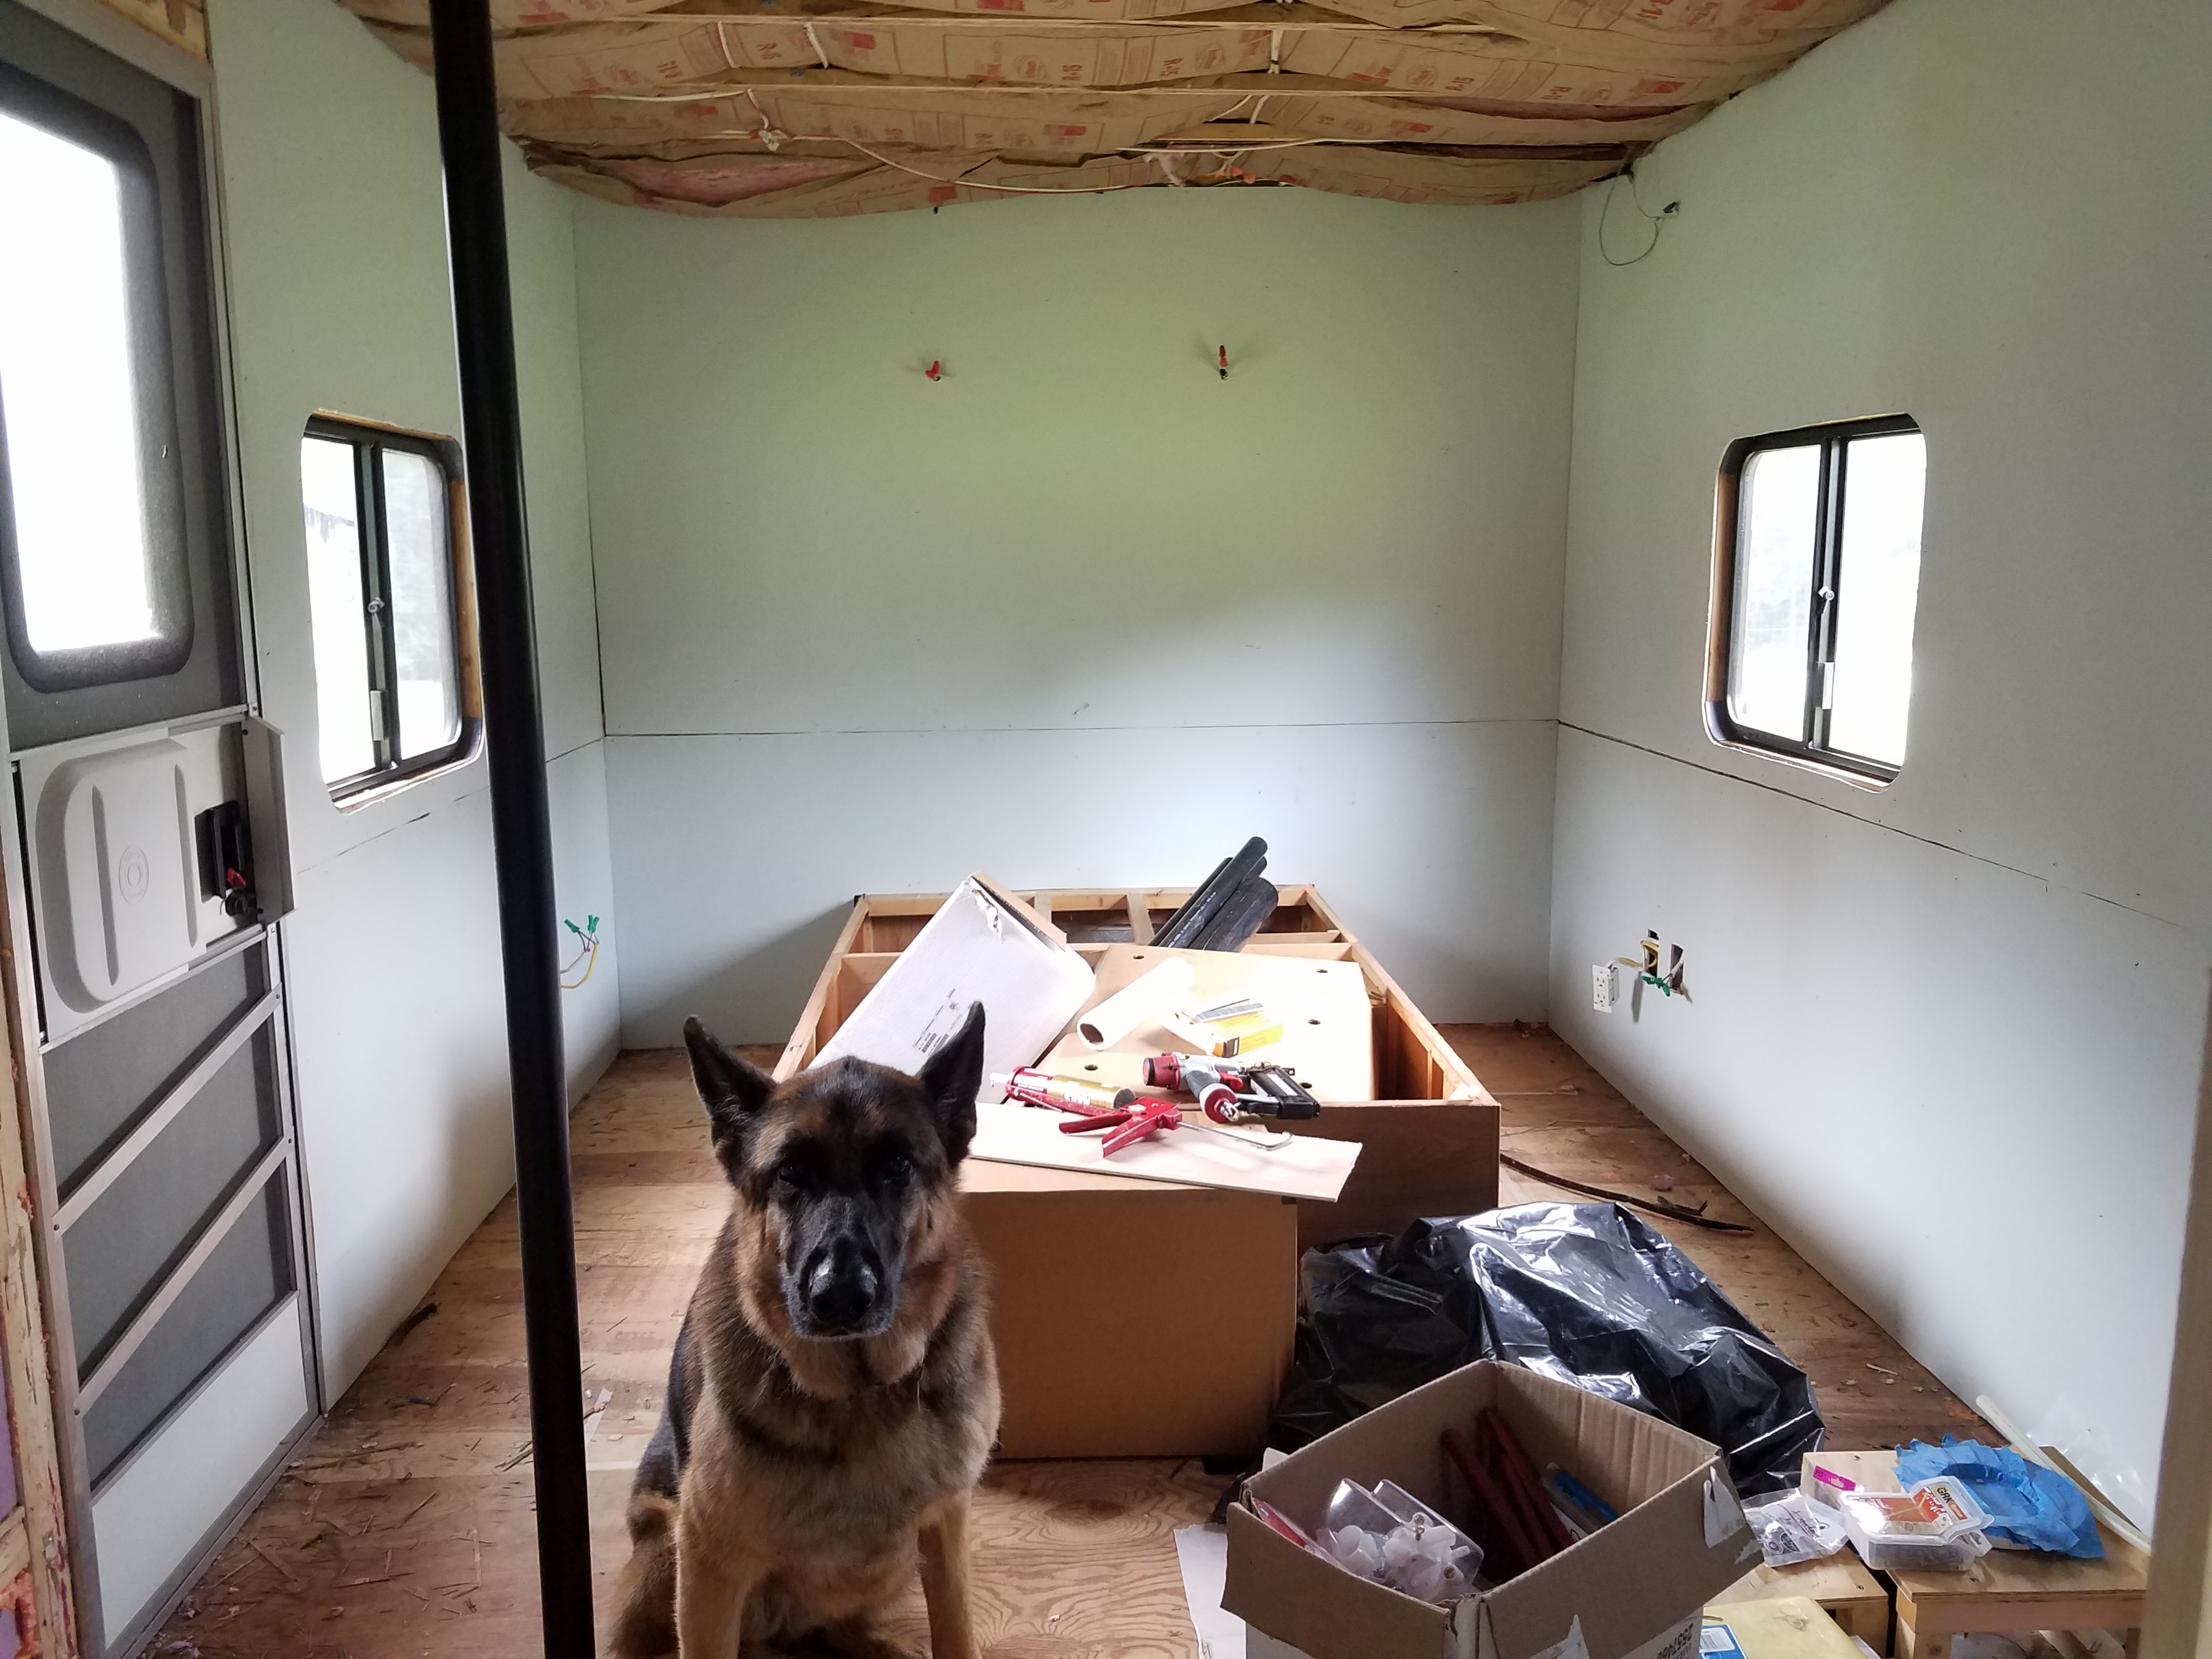 The inside of the travel trailer with new wall panels and a german shepherd dog